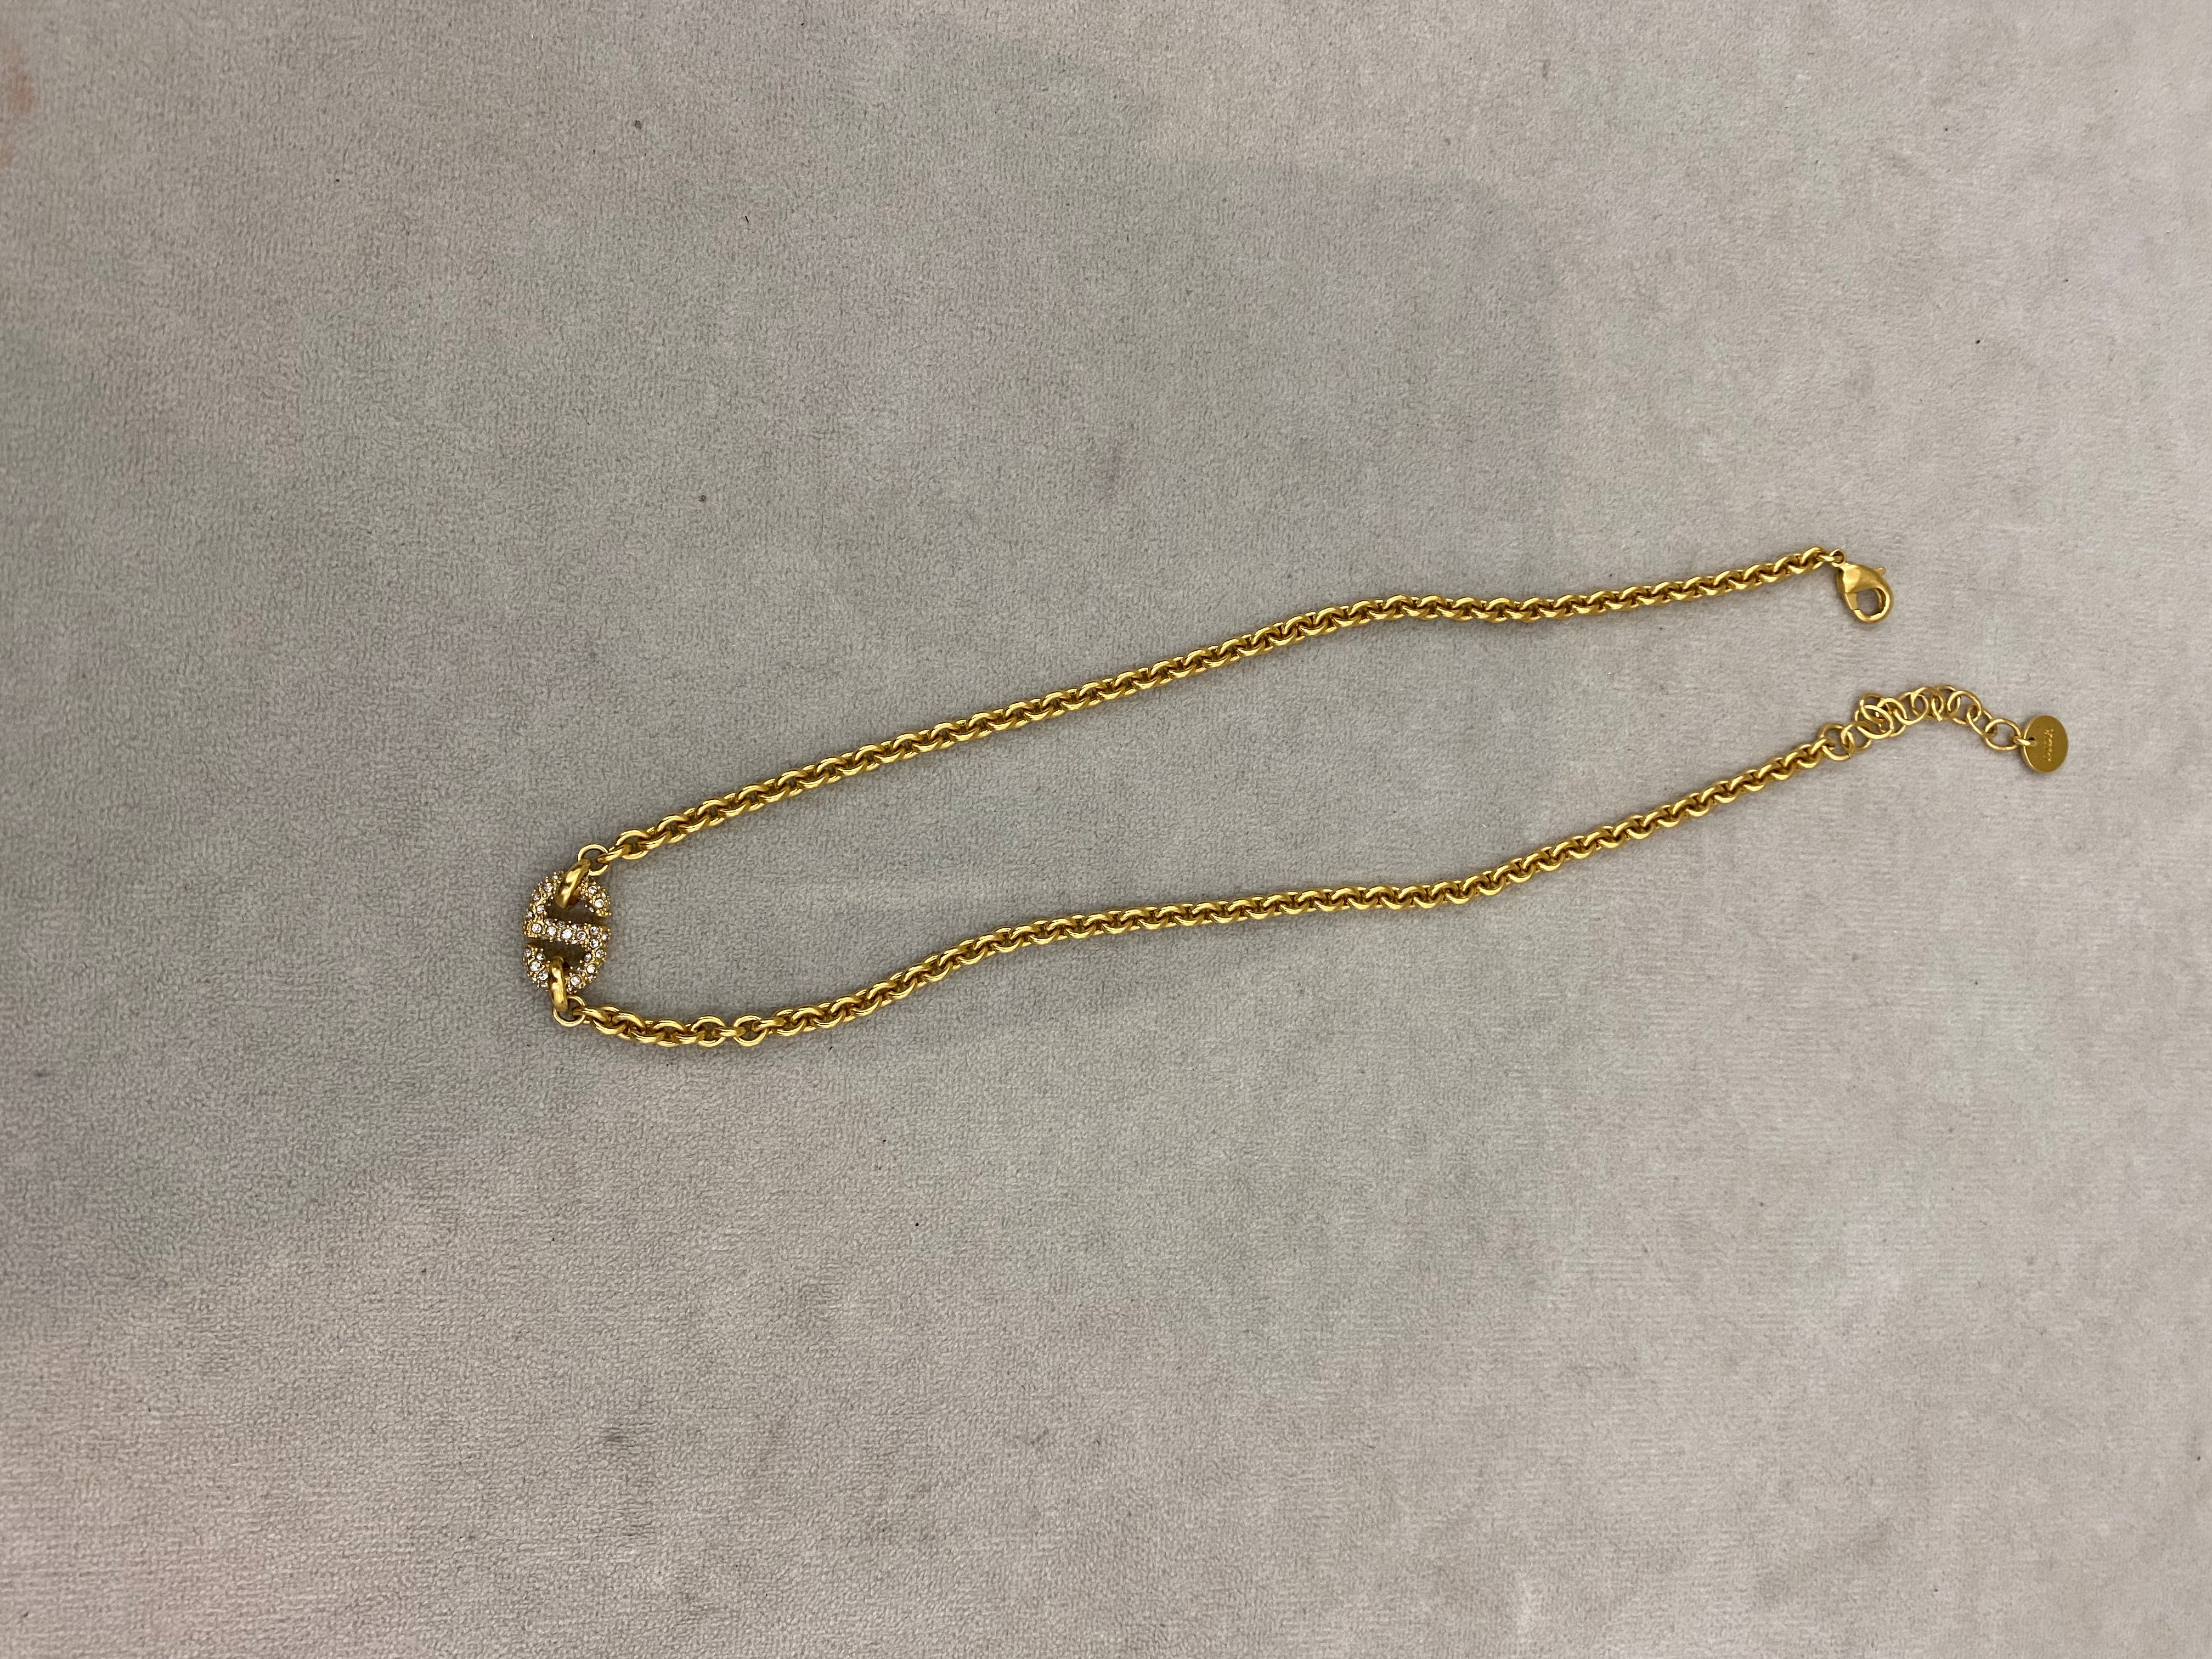 Christian Dior Gold Necklace